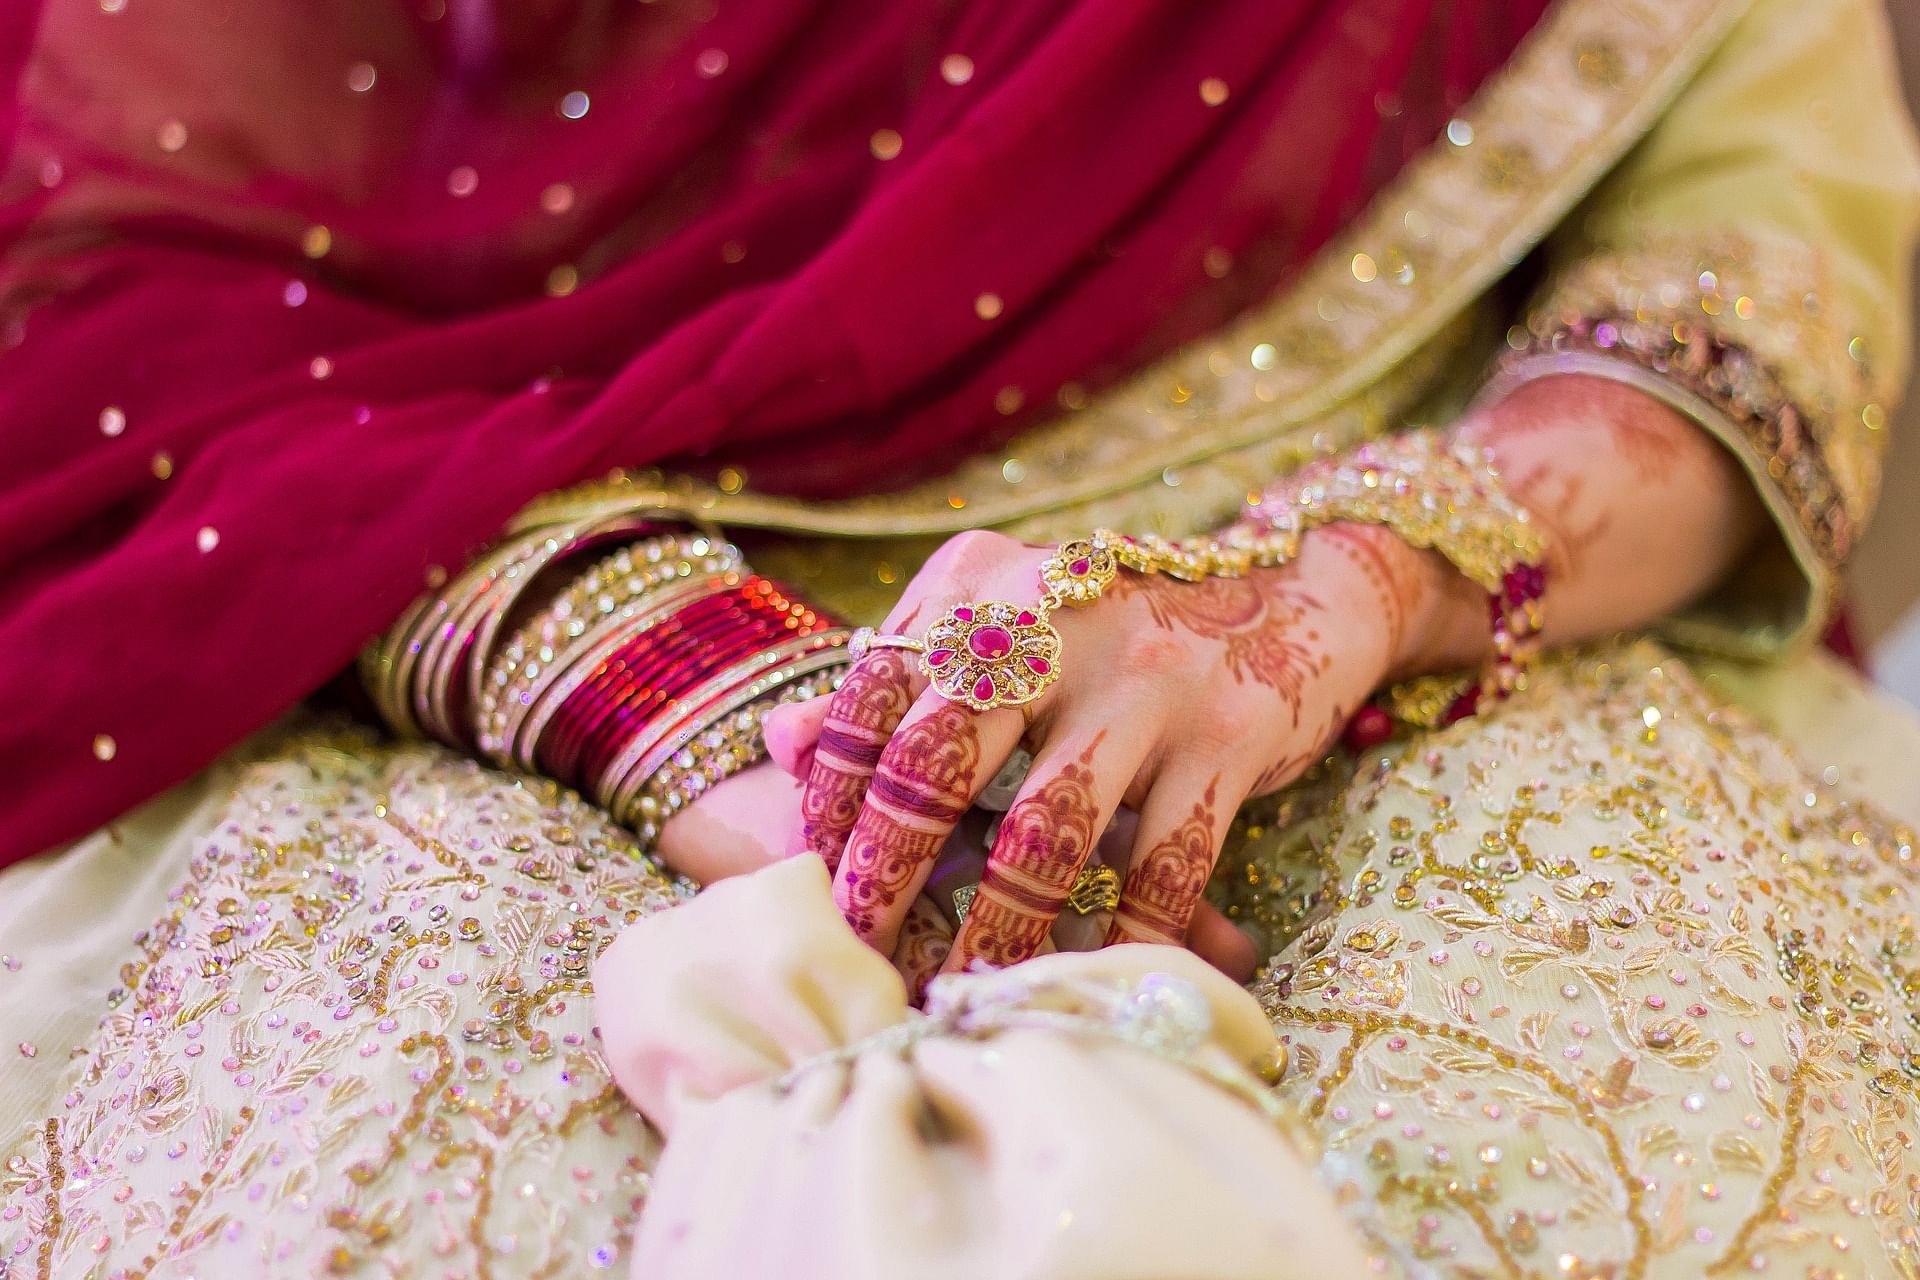 Mehak Kumari, a class IXth student, was allegedly abducted from Jacobabad district on January 15 by Ali Raza Solangi who later married her. Representative image: Pixabay